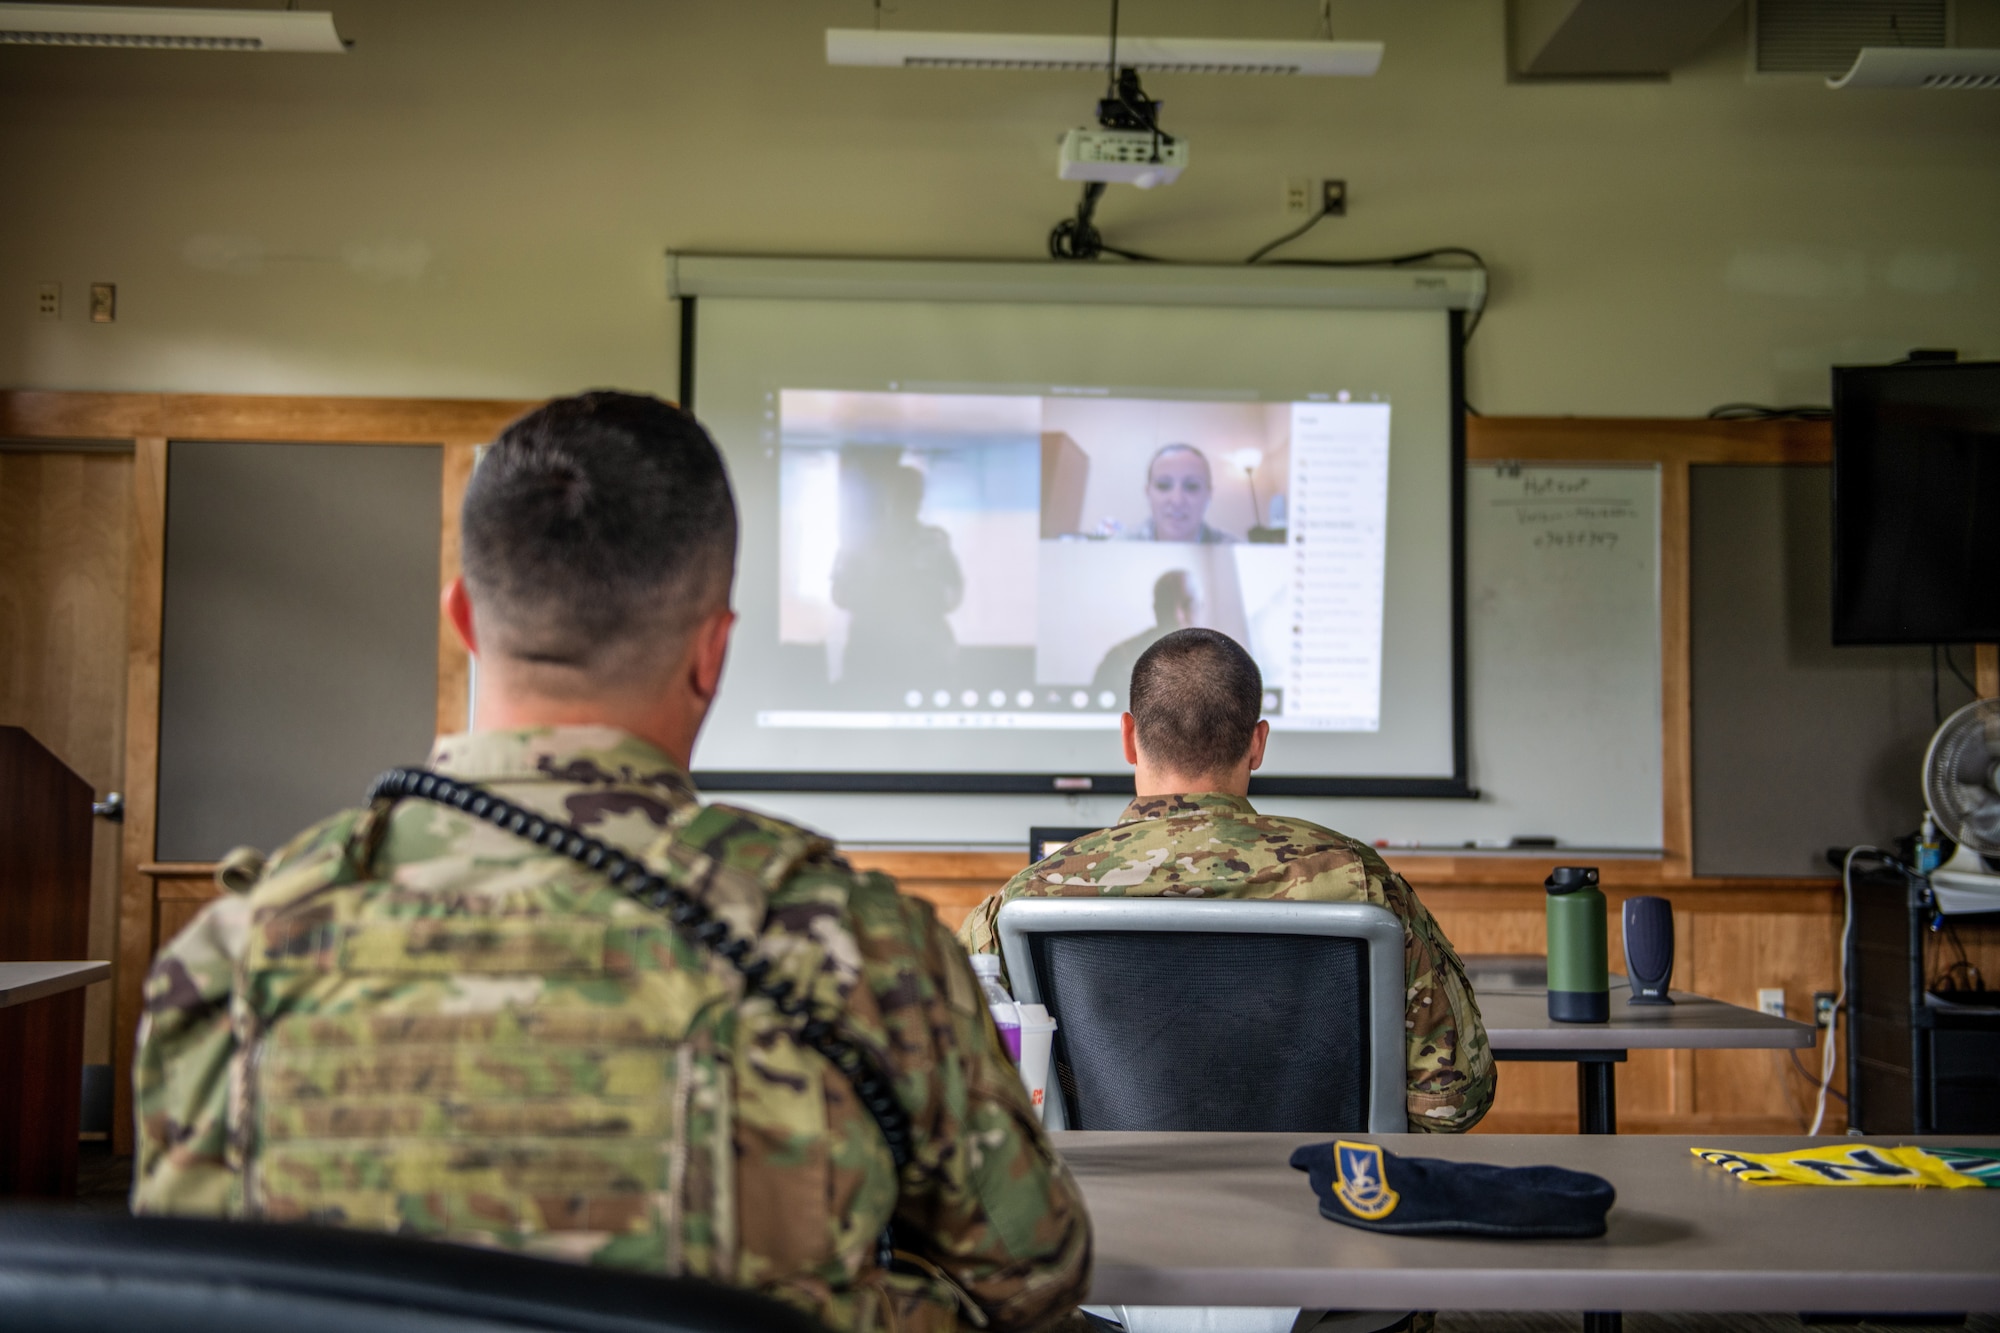 Across the span of three days in July, the Vermont Air National Guard partnered with the Barnes Center for Enlisted Education at Maxwell-Gunter Air Force Base, Ala., to host the first-ever, entirely virtual engagement with any African Military Education Program (AMEP) school in Africa: a course on professional military education (PME) and continuing education for Senegalese Air Force instructors, July 16, 2020, South Burlington, Vt. Attendees called in from Alabama, Vermont, Senegal and Djibouti to participate in the virtual workshops designed to ensure the continued skills development of Airmen during the ongoing COVID-19 pandemic. (U.S. Air National Guard photo by Miss Julie M. Shea)